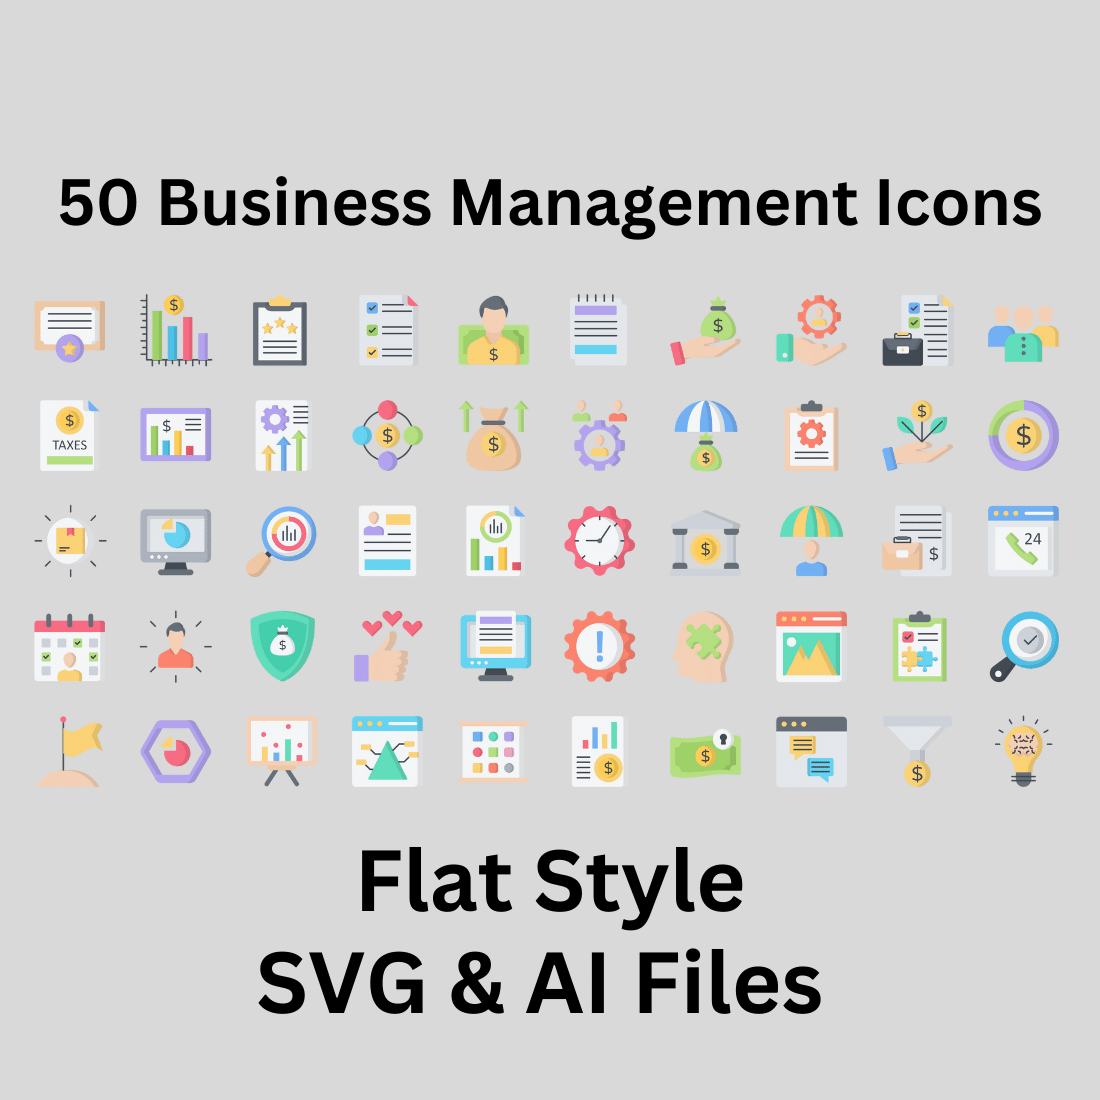 Business Management Icon Set 50 Flat Icons - SVG And AI Files preview image.